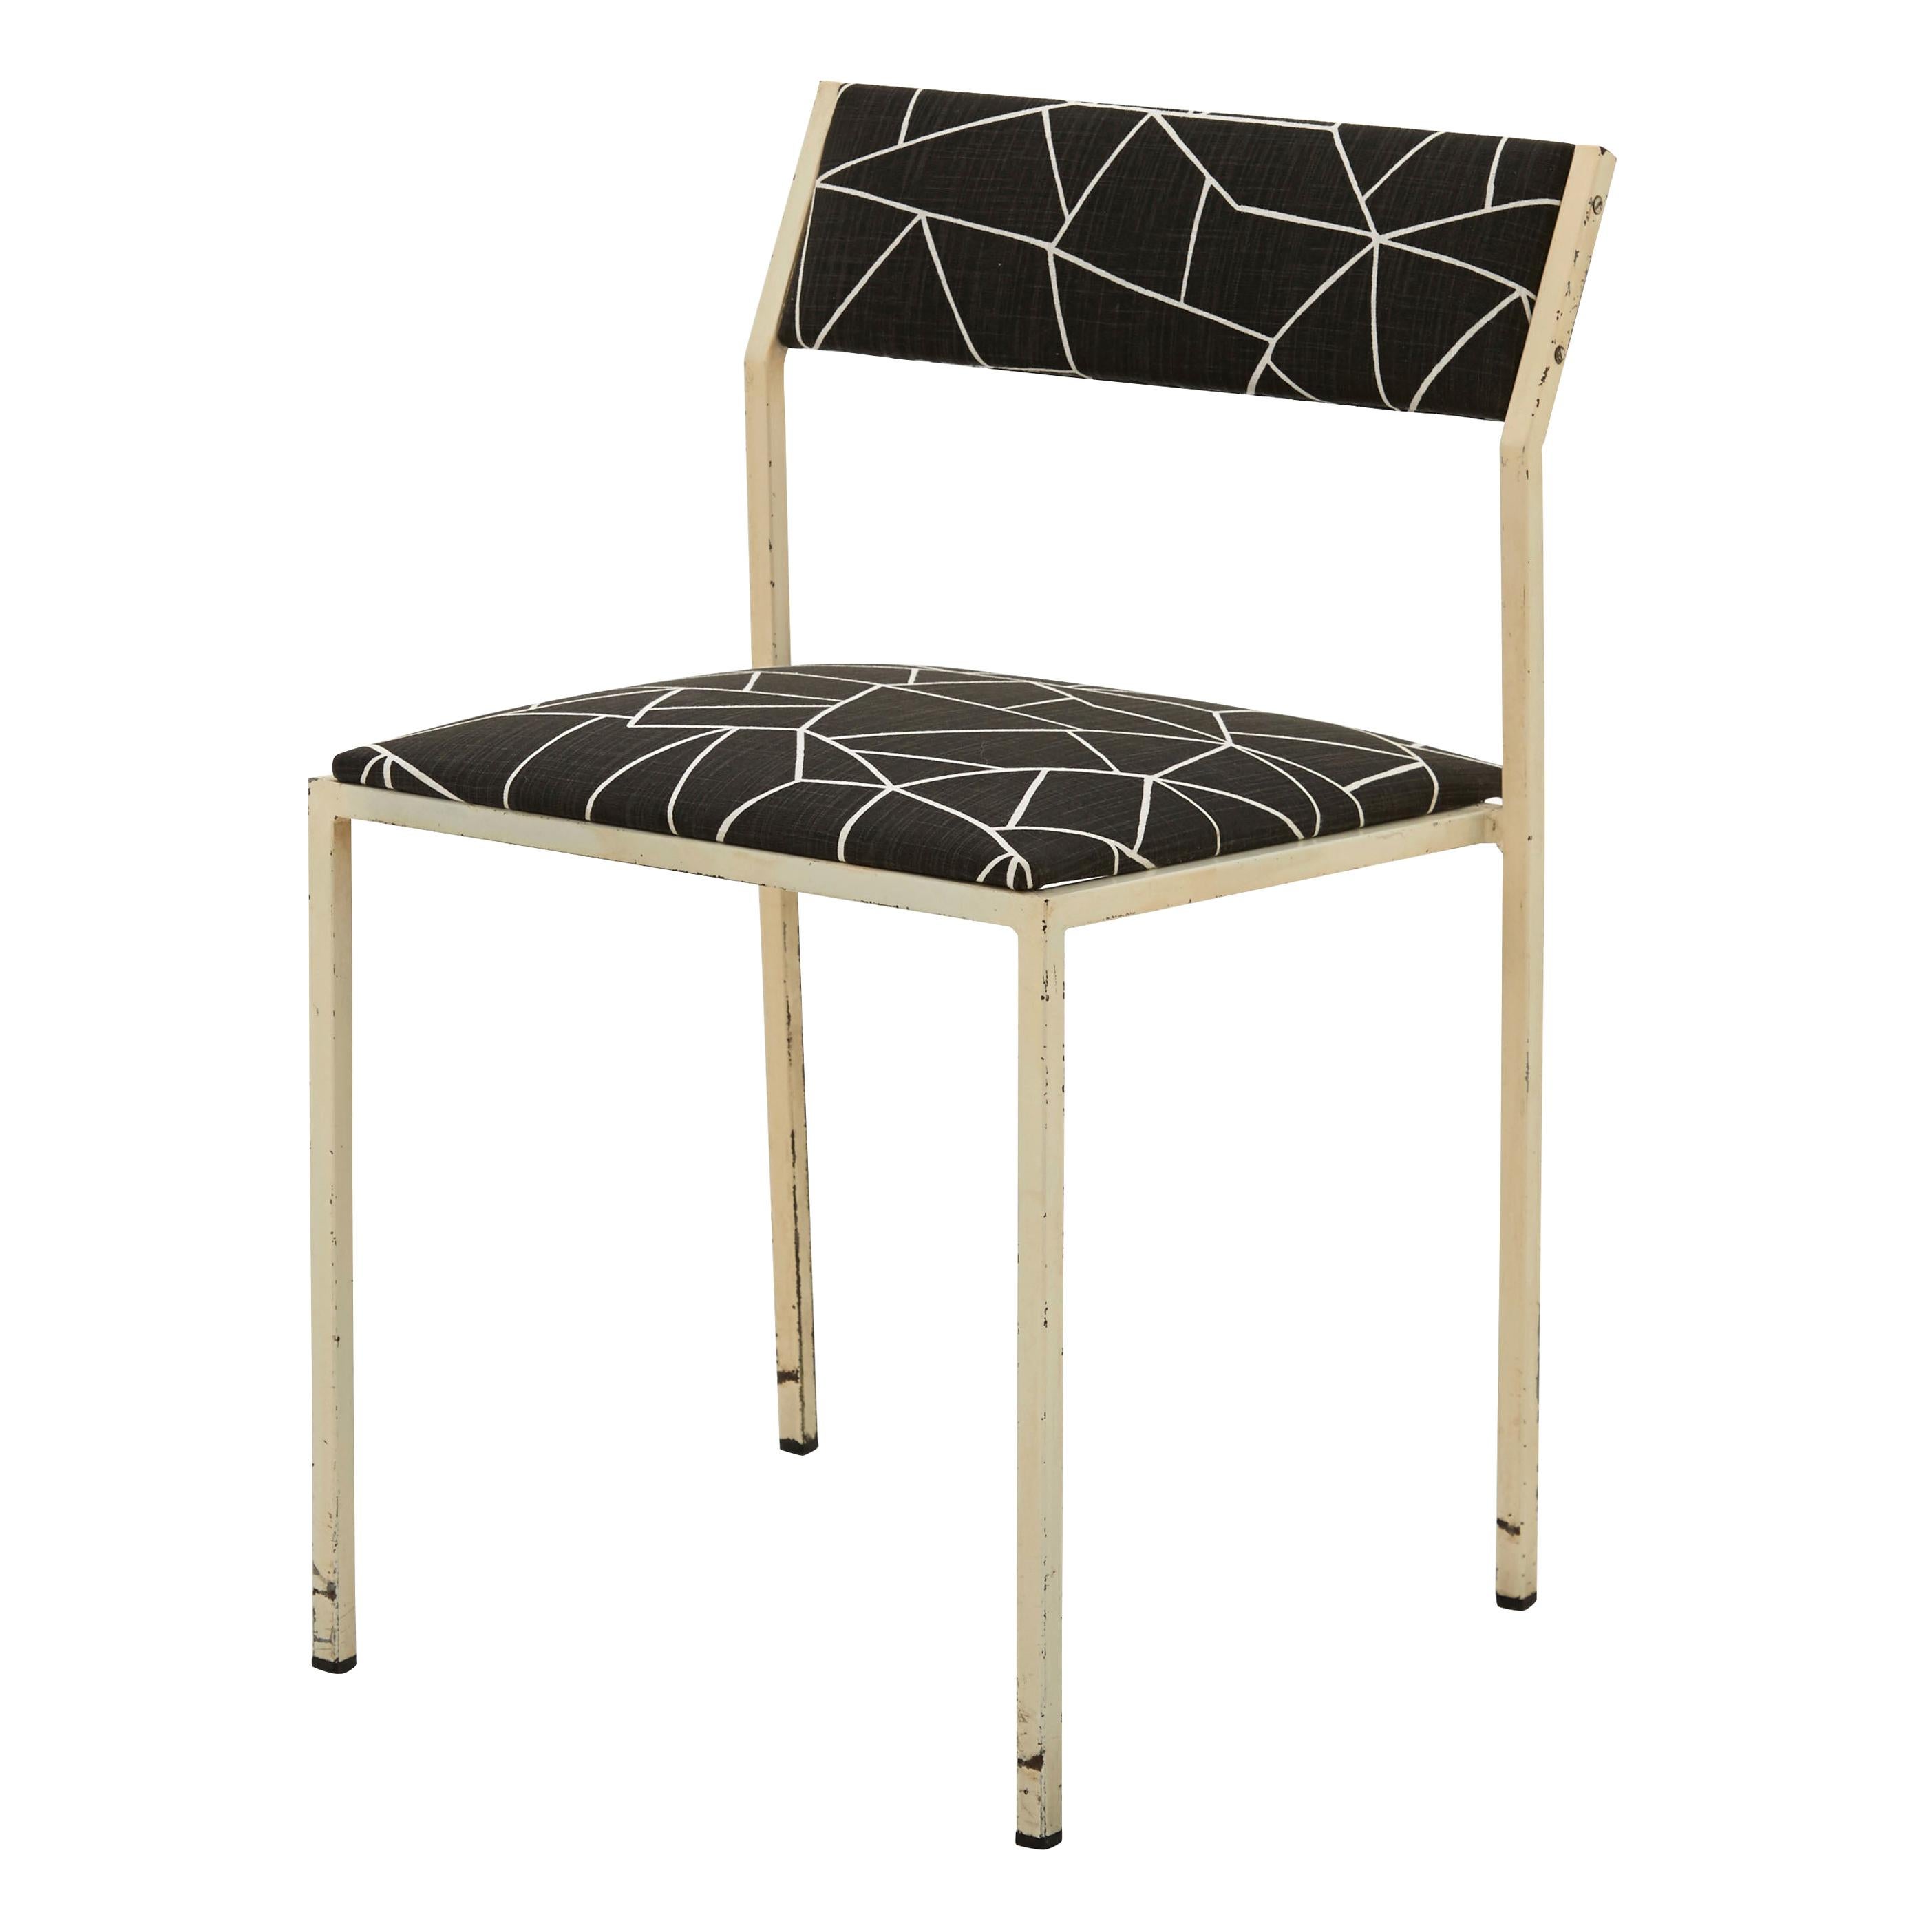 Painted Metal Frame Dining Chair with Cotton Geometric Print For Sale